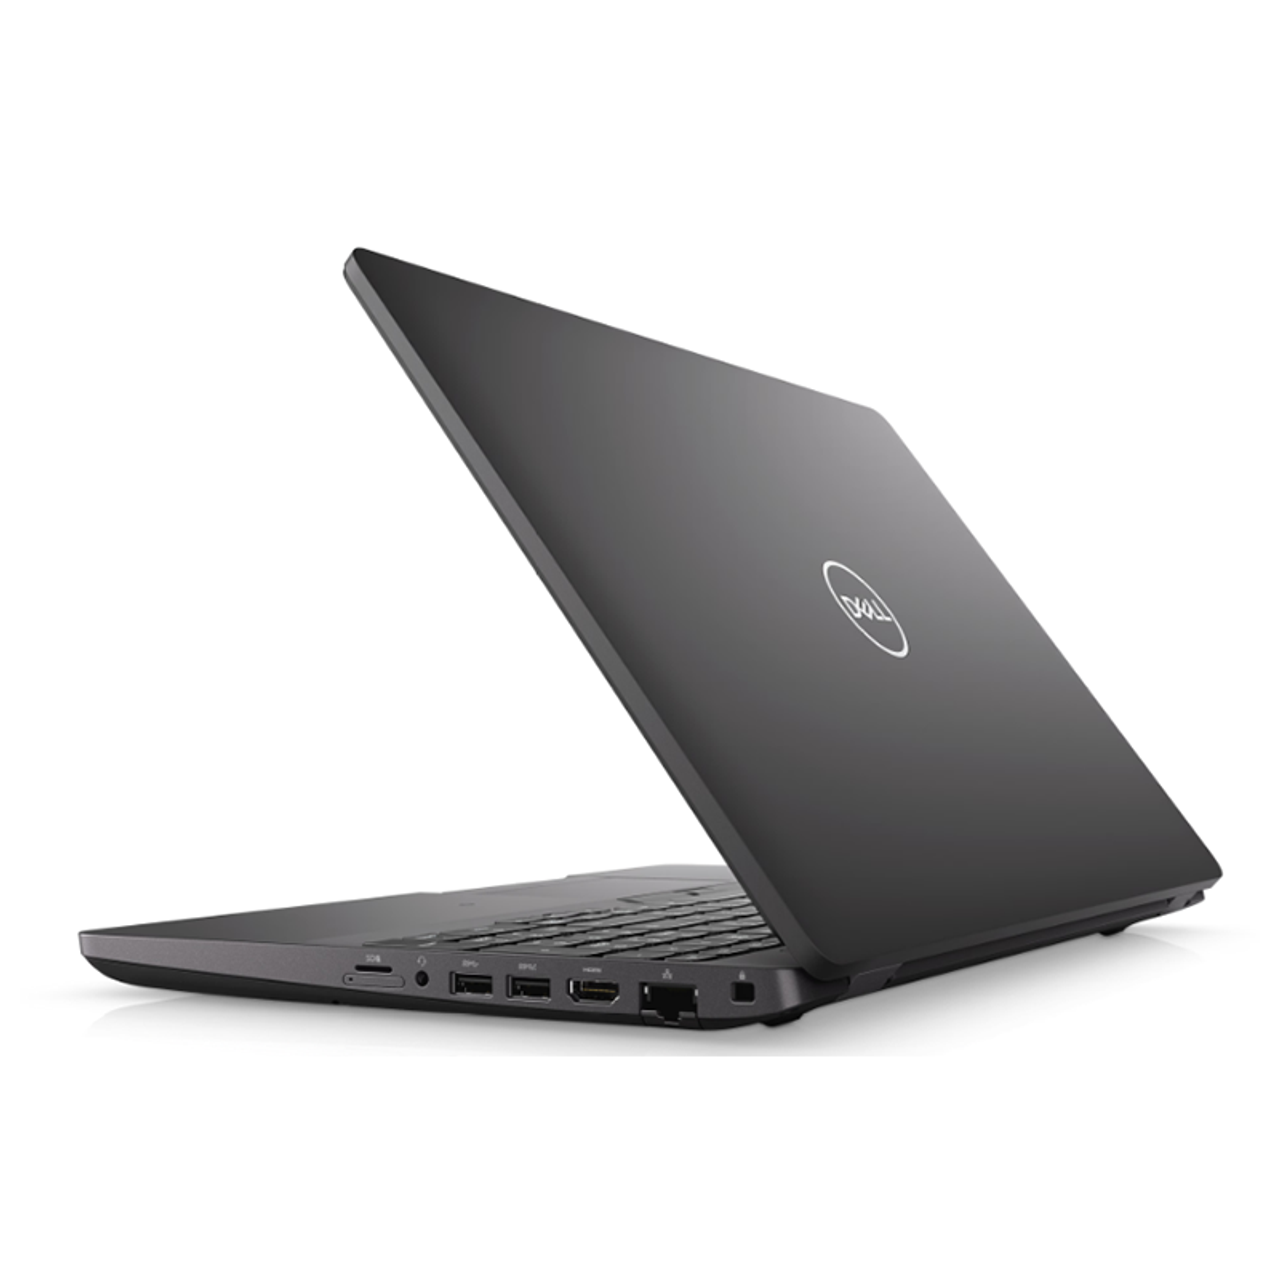 Dell Precision 3541 Business Laptop - Intel Core i7-9850H 2.6GHz 6 Core  Processor - 16GB DDR4 2666MHz - 512GB NVMe Solid State Drive - 15.6” FHD 